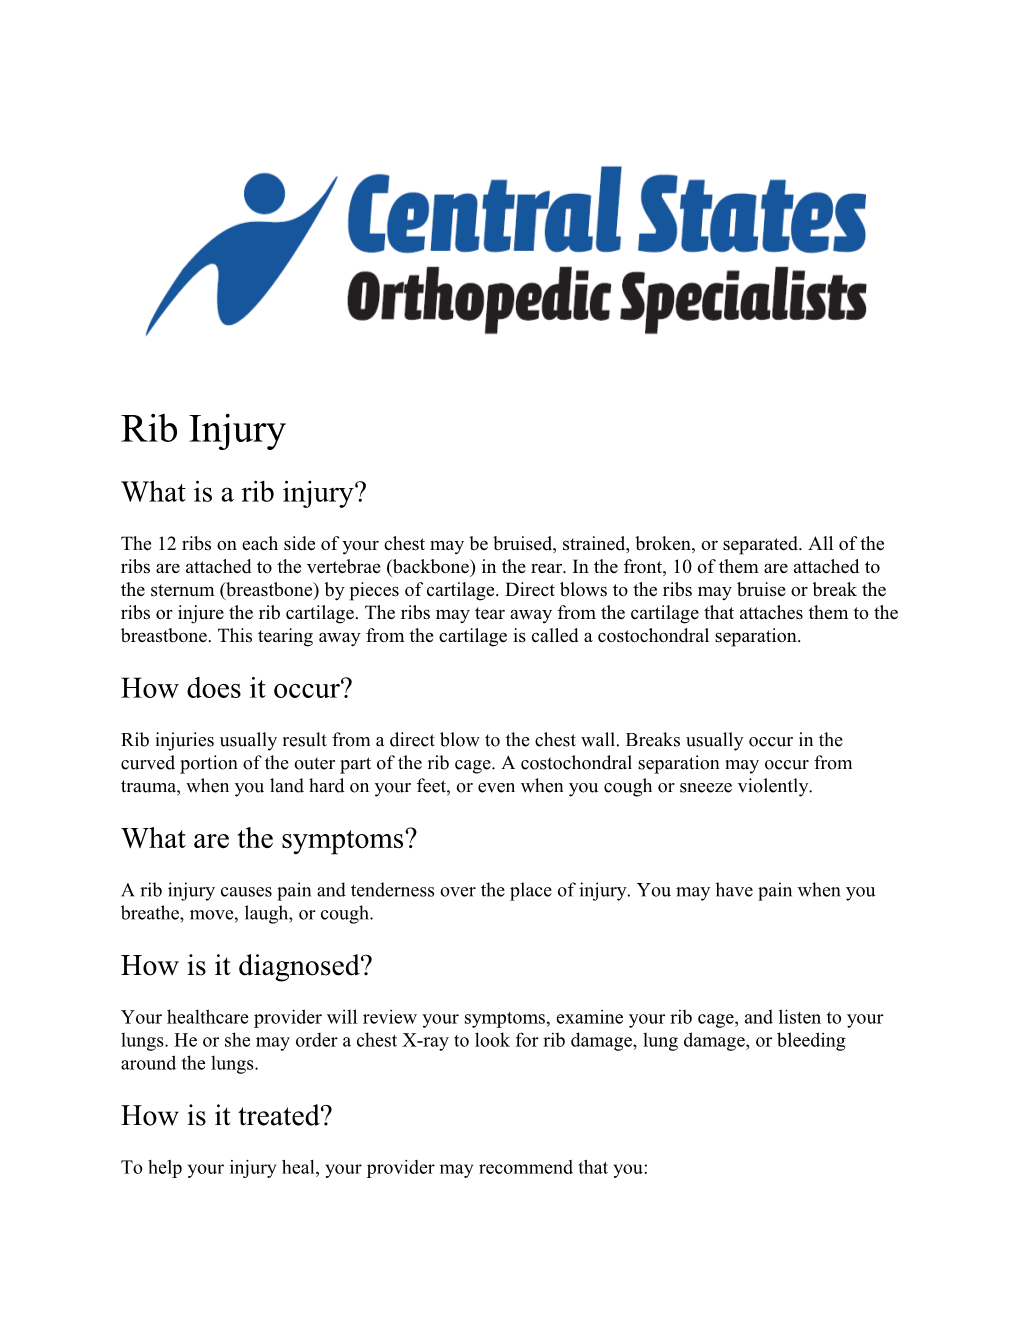 What Is a Rib Injury?